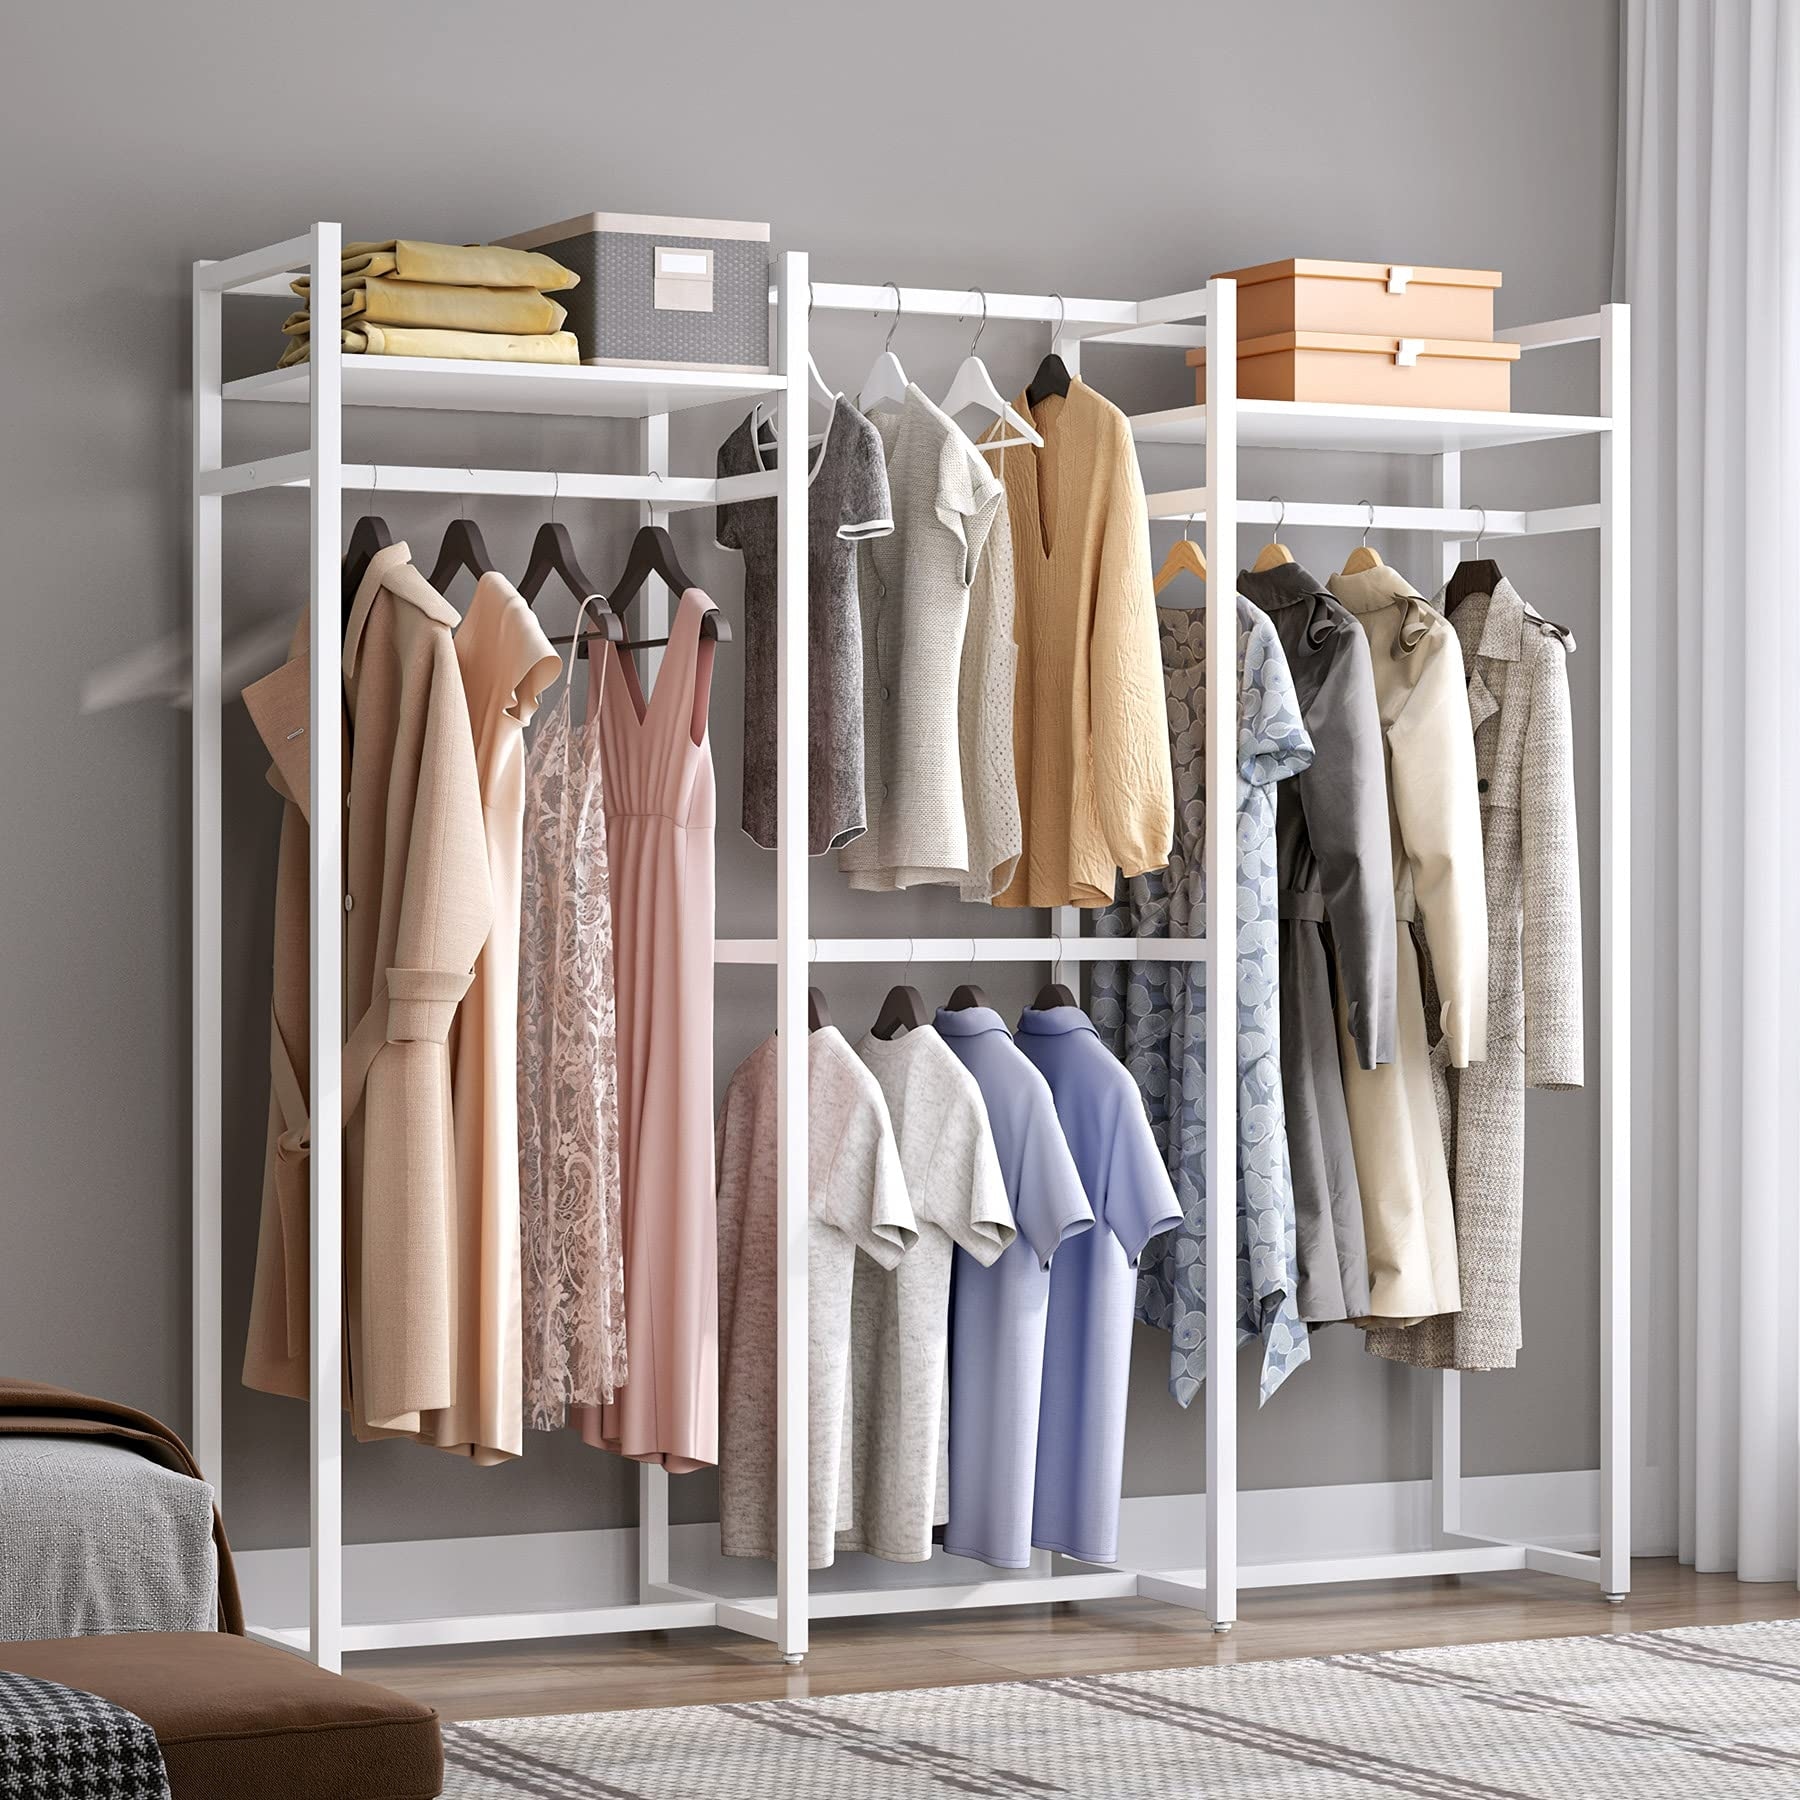 https://ak1.ostkcdn.com/images/products/is/images/direct/23987c1d3687d1fd4c47d712a3bf1e59537e225d/Free-Standing-Closet-Organizer-with-Hanging-Rods%2C-Garment-Rack-Heavy-Duty-Clothes-Rack-with-Storage-Shelves%2C-Max-Load-500LBS.jpg